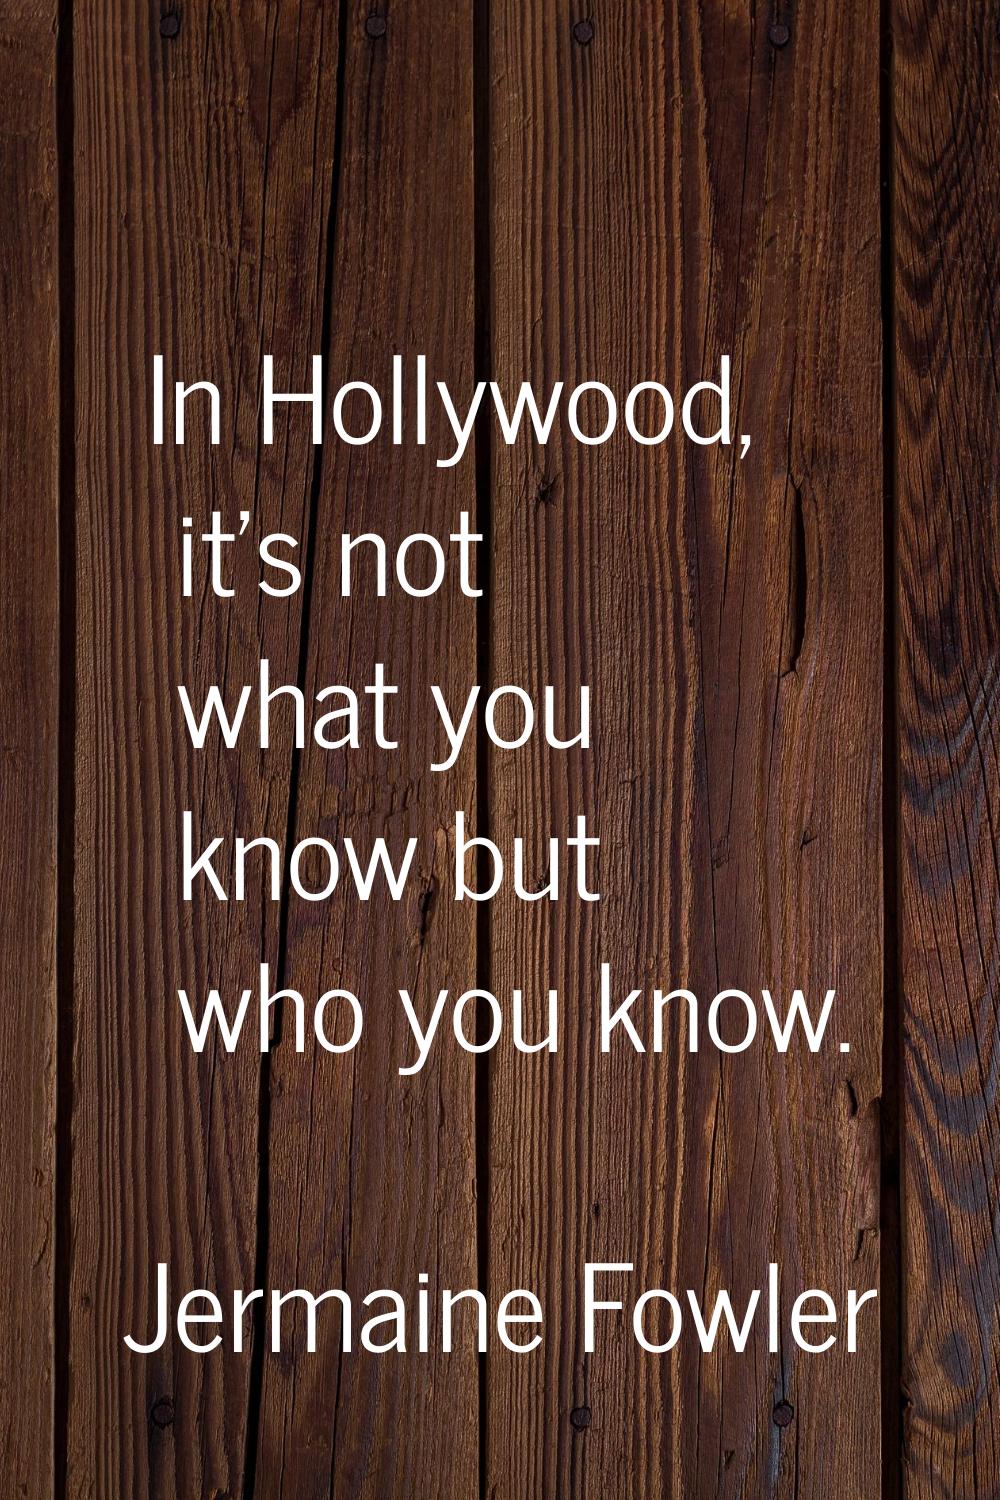 In Hollywood, it's not what you know but who you know.